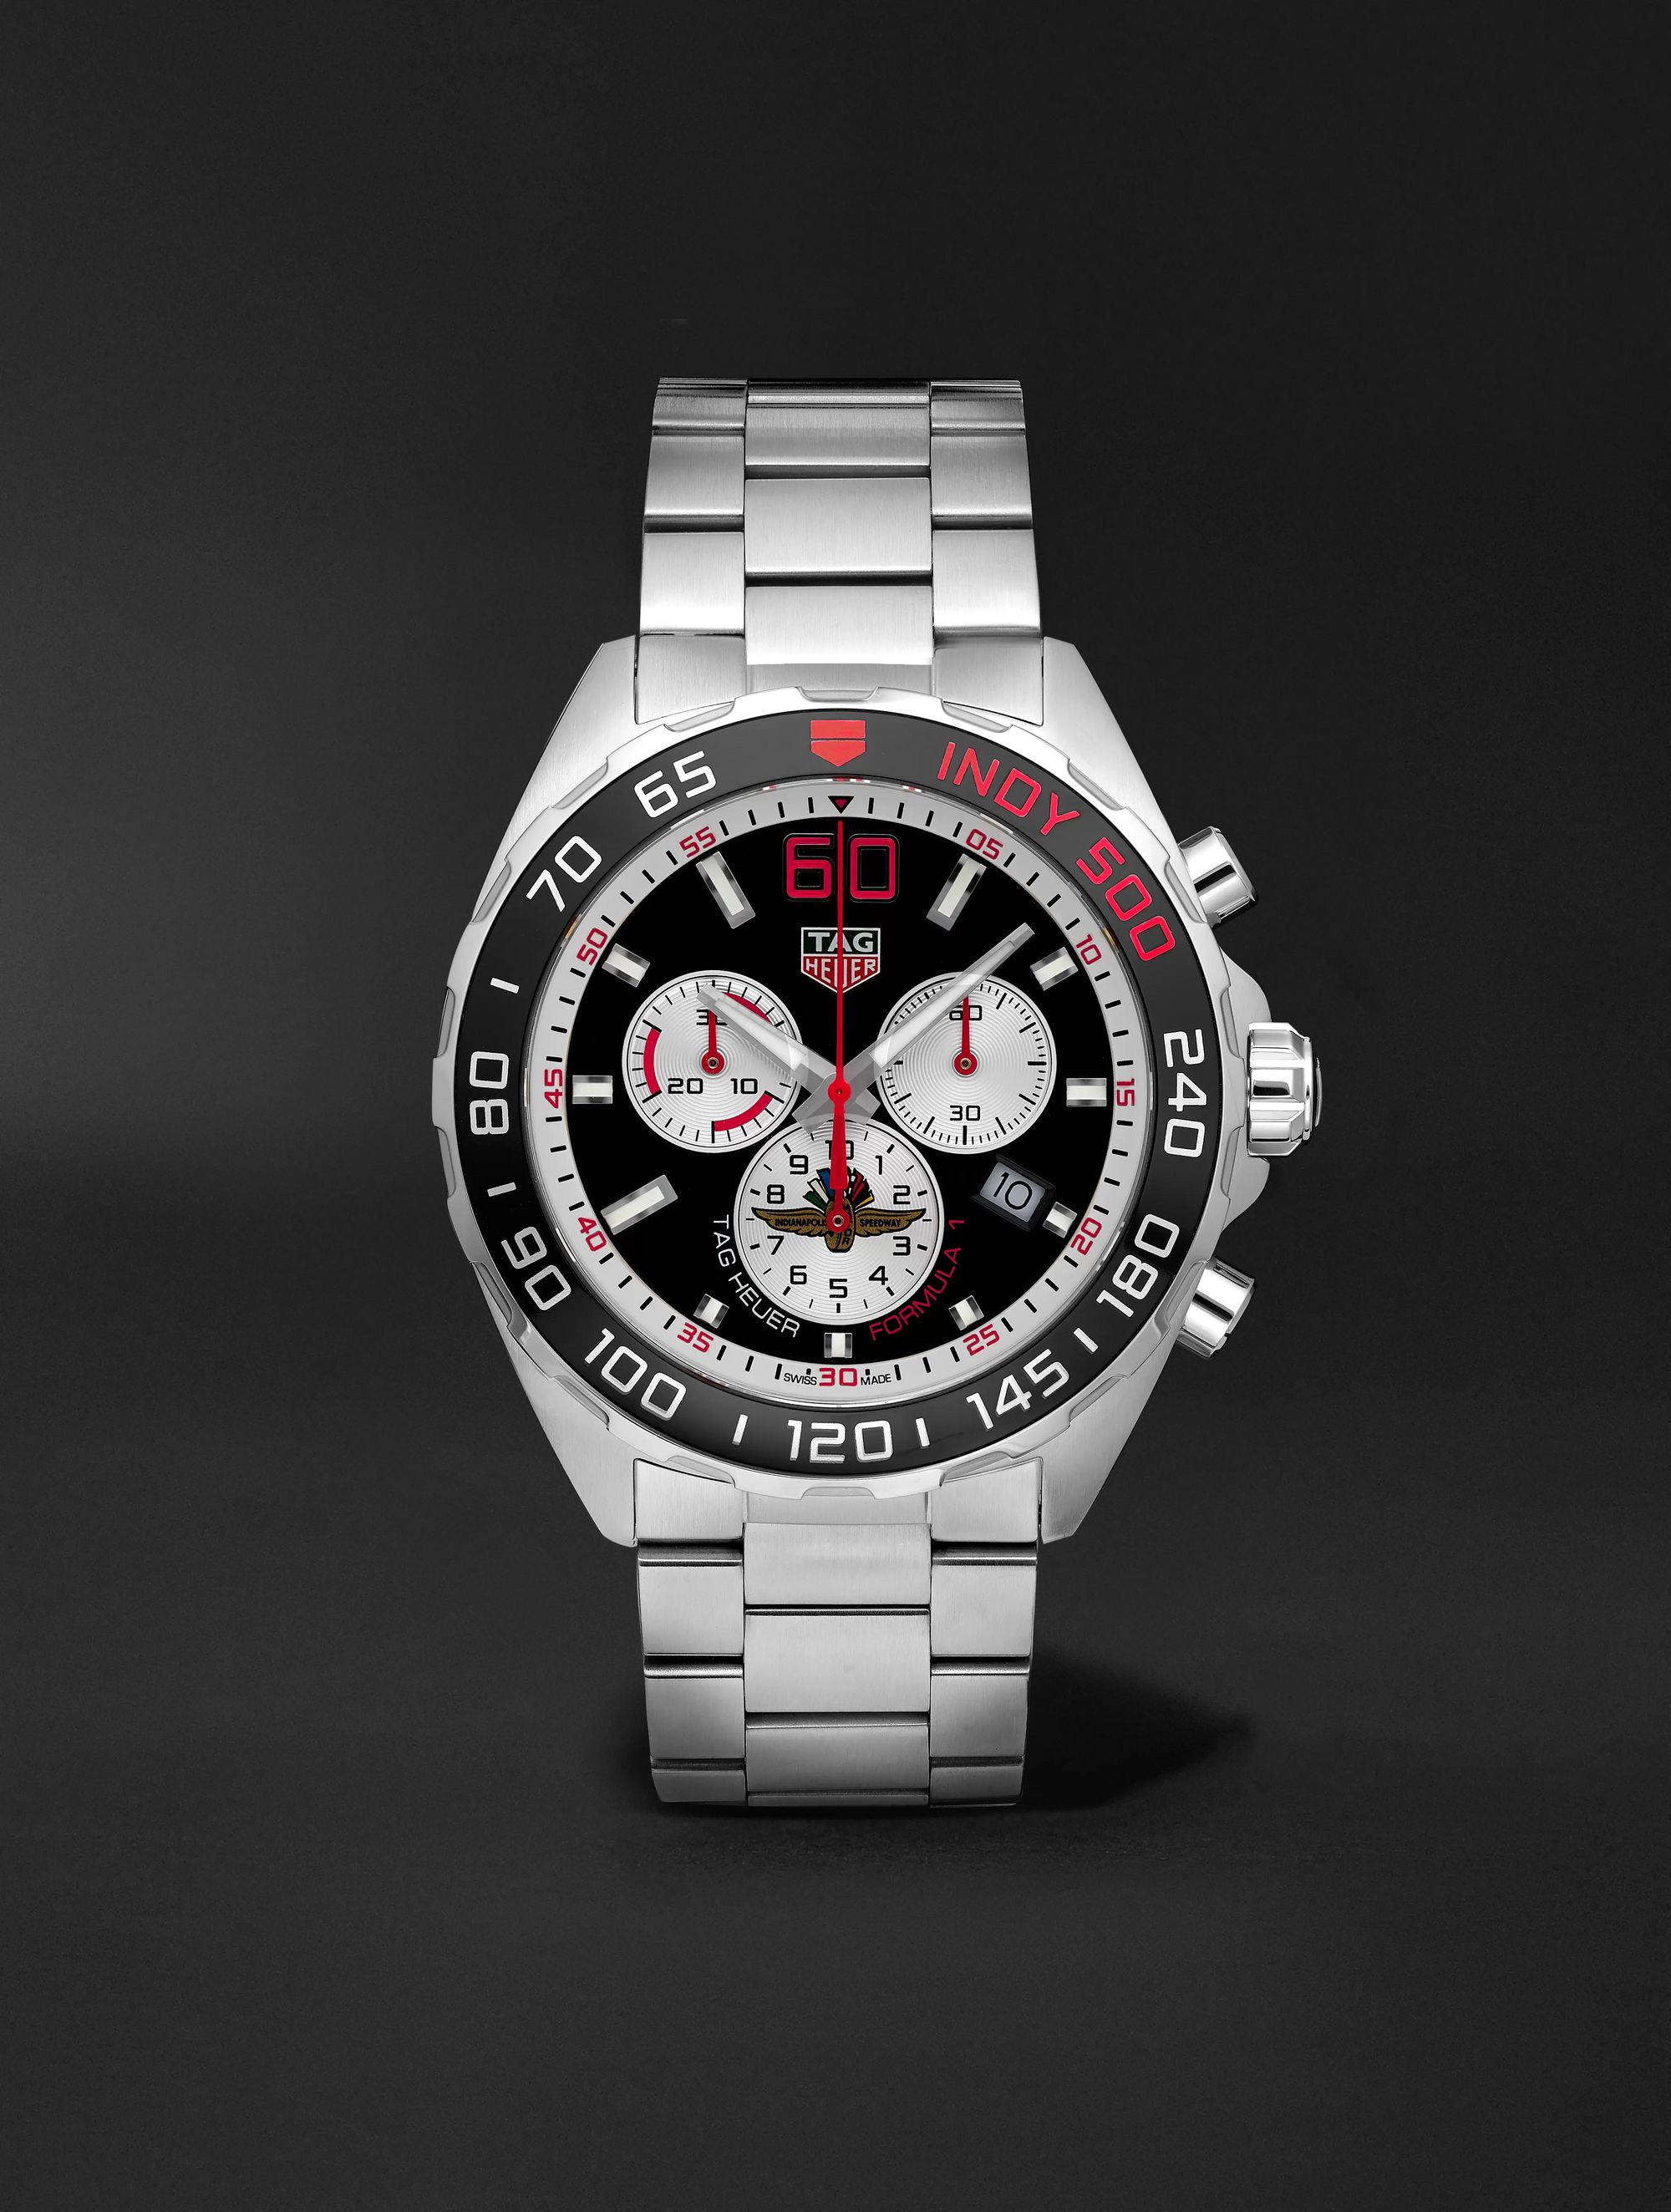 TAG Heuer Formula 1 Indy 500 Limited Edition Chronograph 43mm Stainless Steel Watch, Ref. No. CAZ101V.BA0842